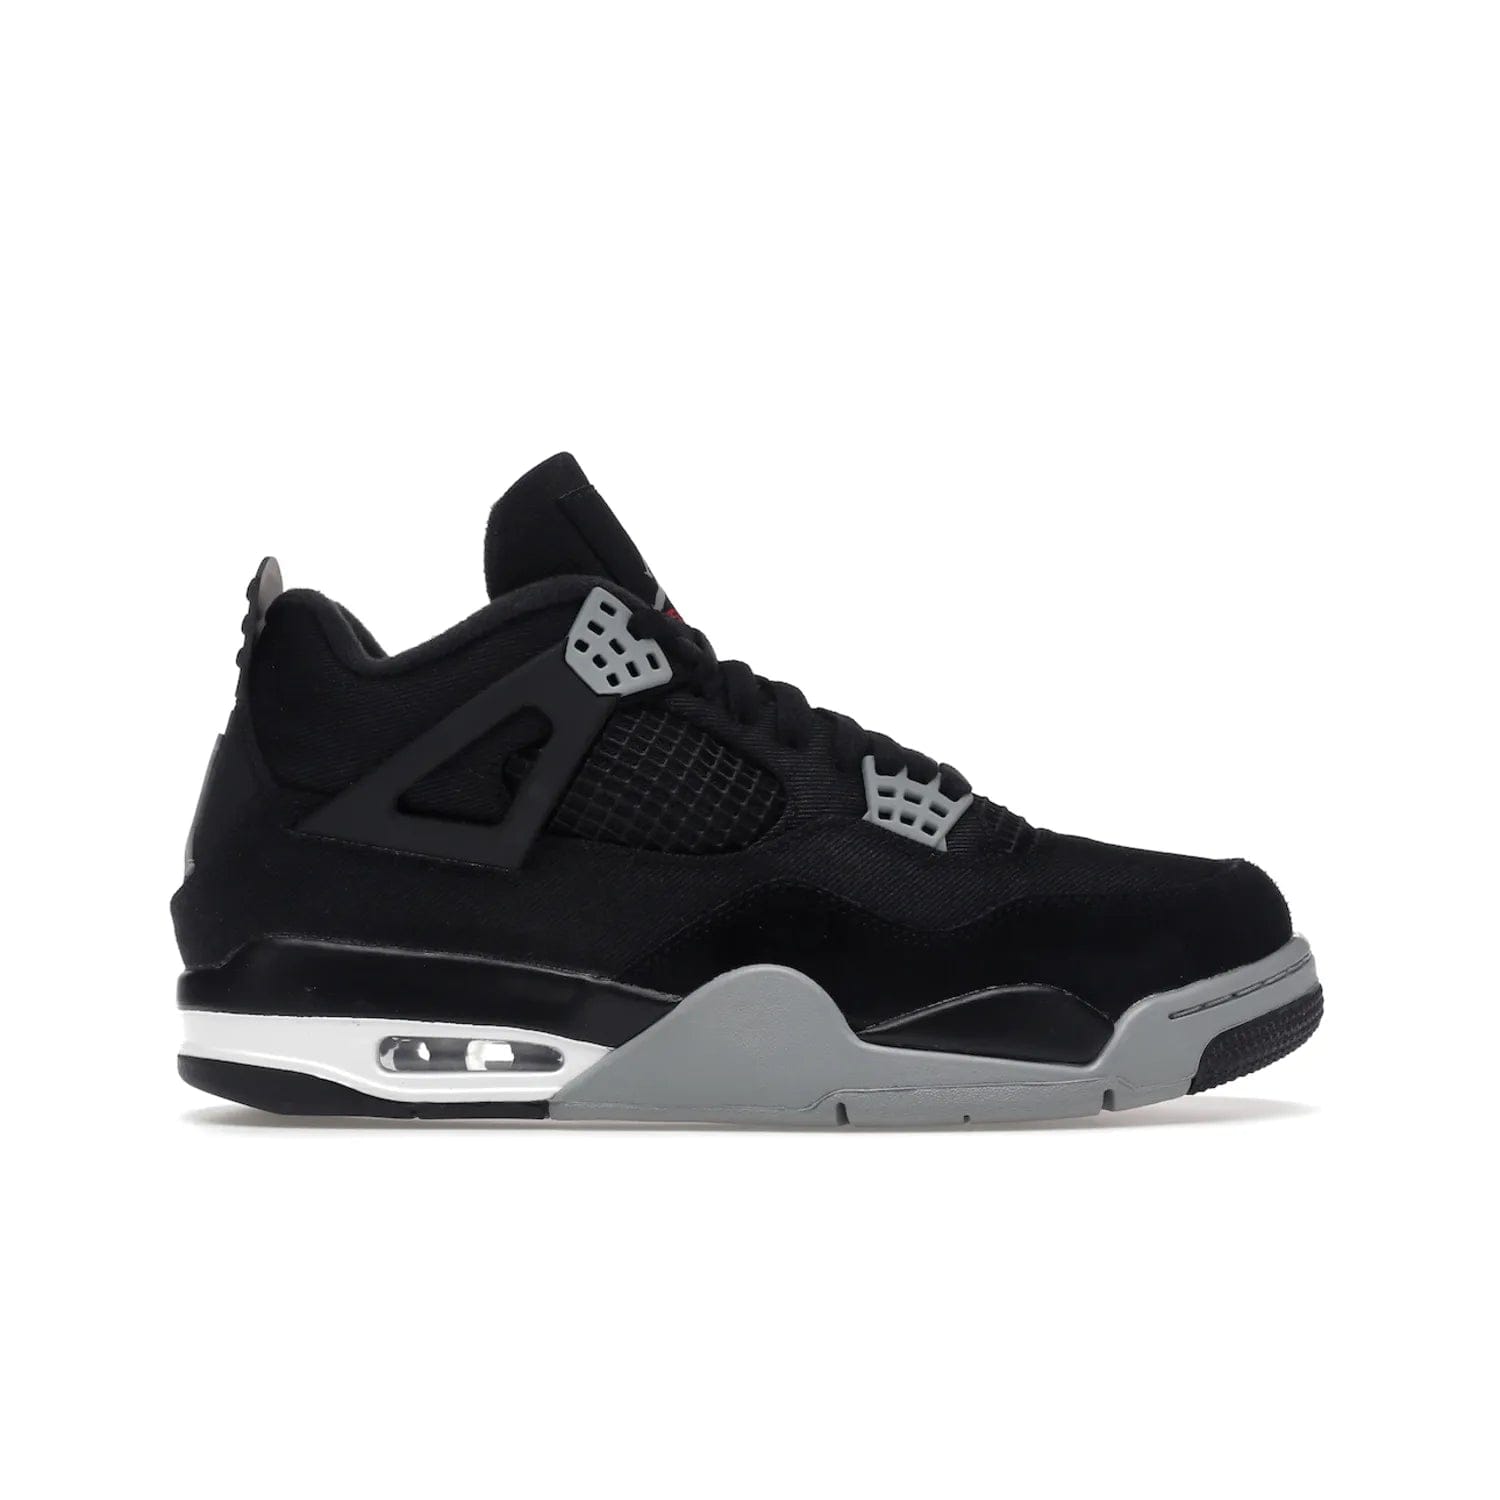 Jordan 4 Retro SE Black Canvas - Image 1 - Only at www.BallersClubKickz.com - The Air Jordan 4 Retro SE Black Canvas brings timeless style and modern luxury. Classic mid-top sneaker in black canvas and grey suede with tonal Jumpman logo, Flight logo and polyurethane midsole with visible Air-sole cushioning. Refresh your sneaker collection and rock the Air Jordan 4 Retro SE Black Canvas.